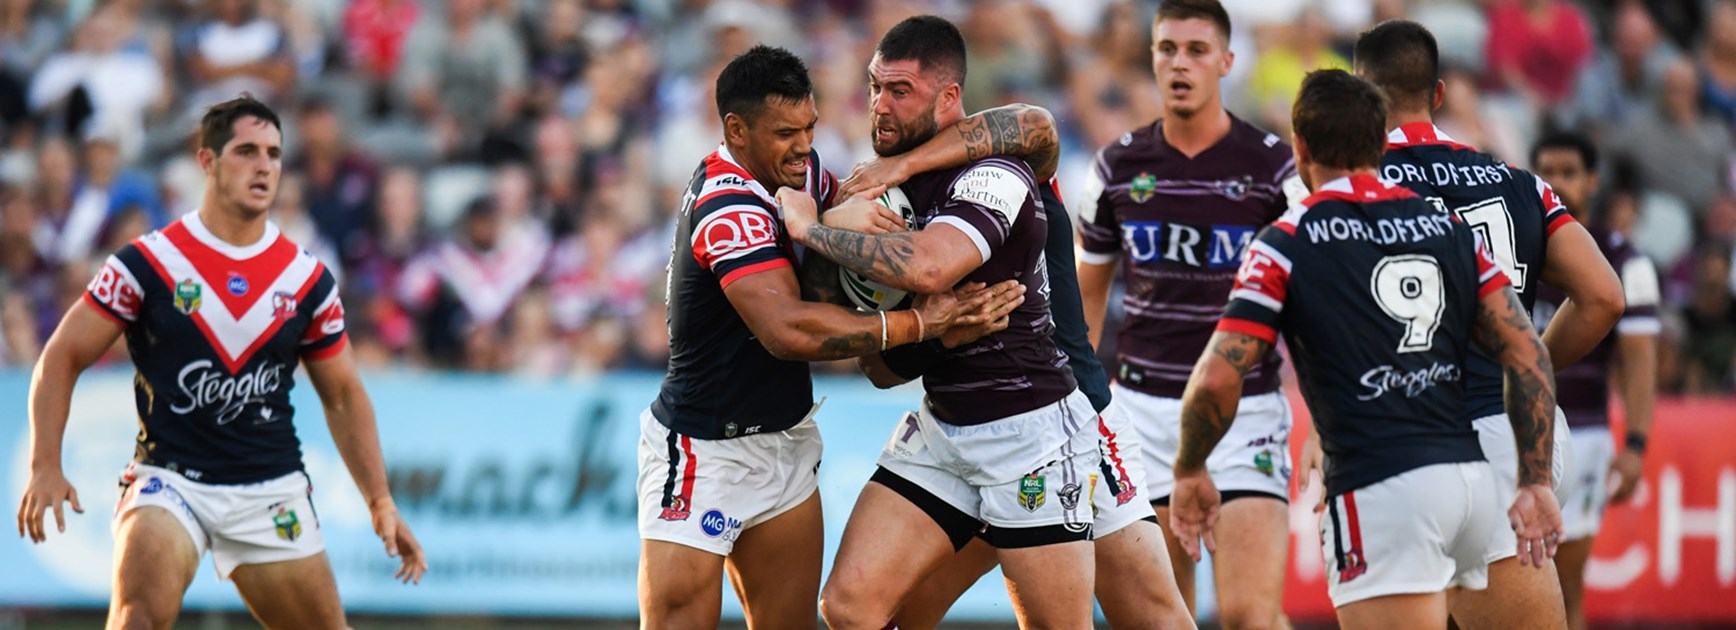 Manly lose 28-26 to Roosters in the Community Cup